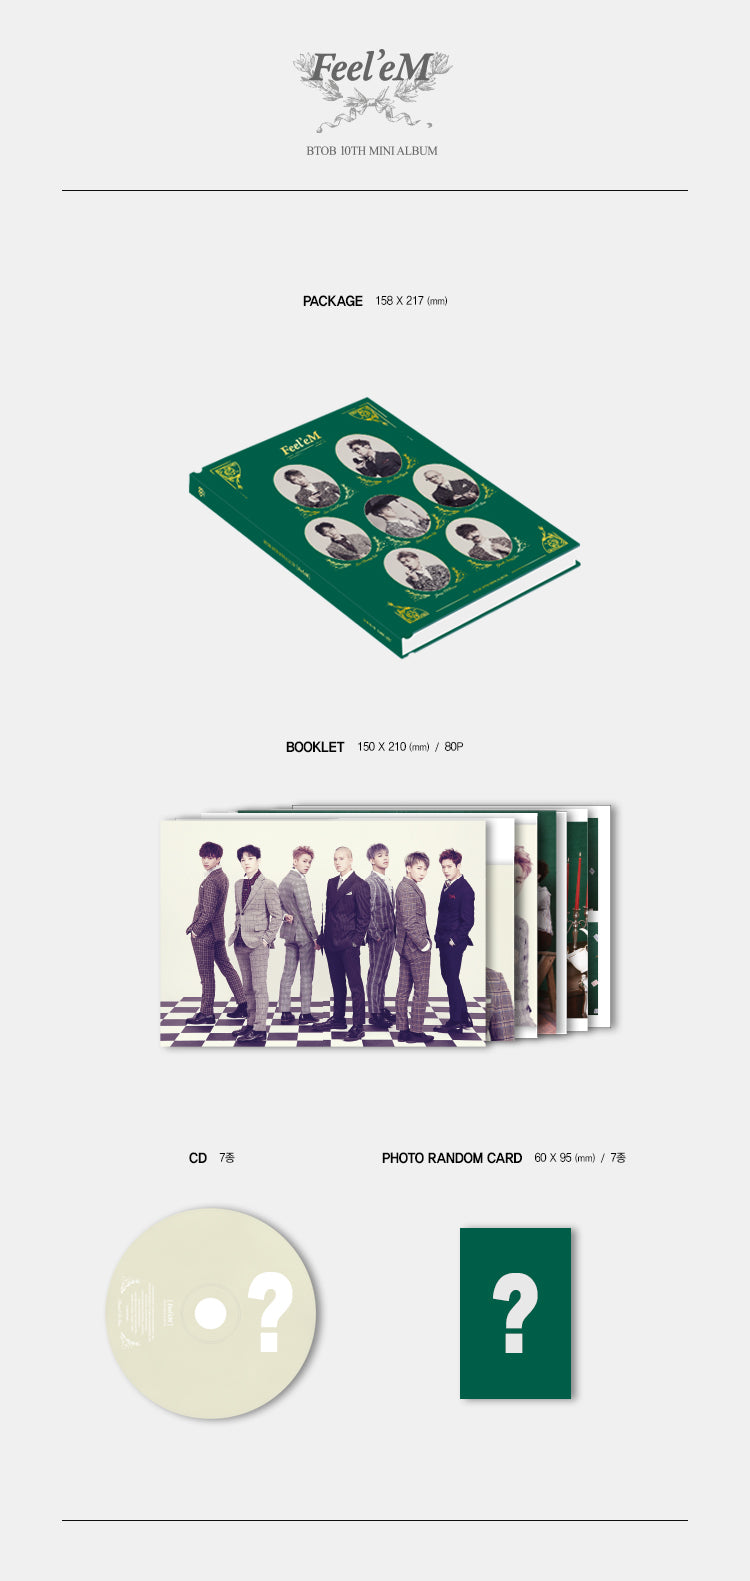 1 CD
1 Photo Book (80 pages)
1 Photo Card